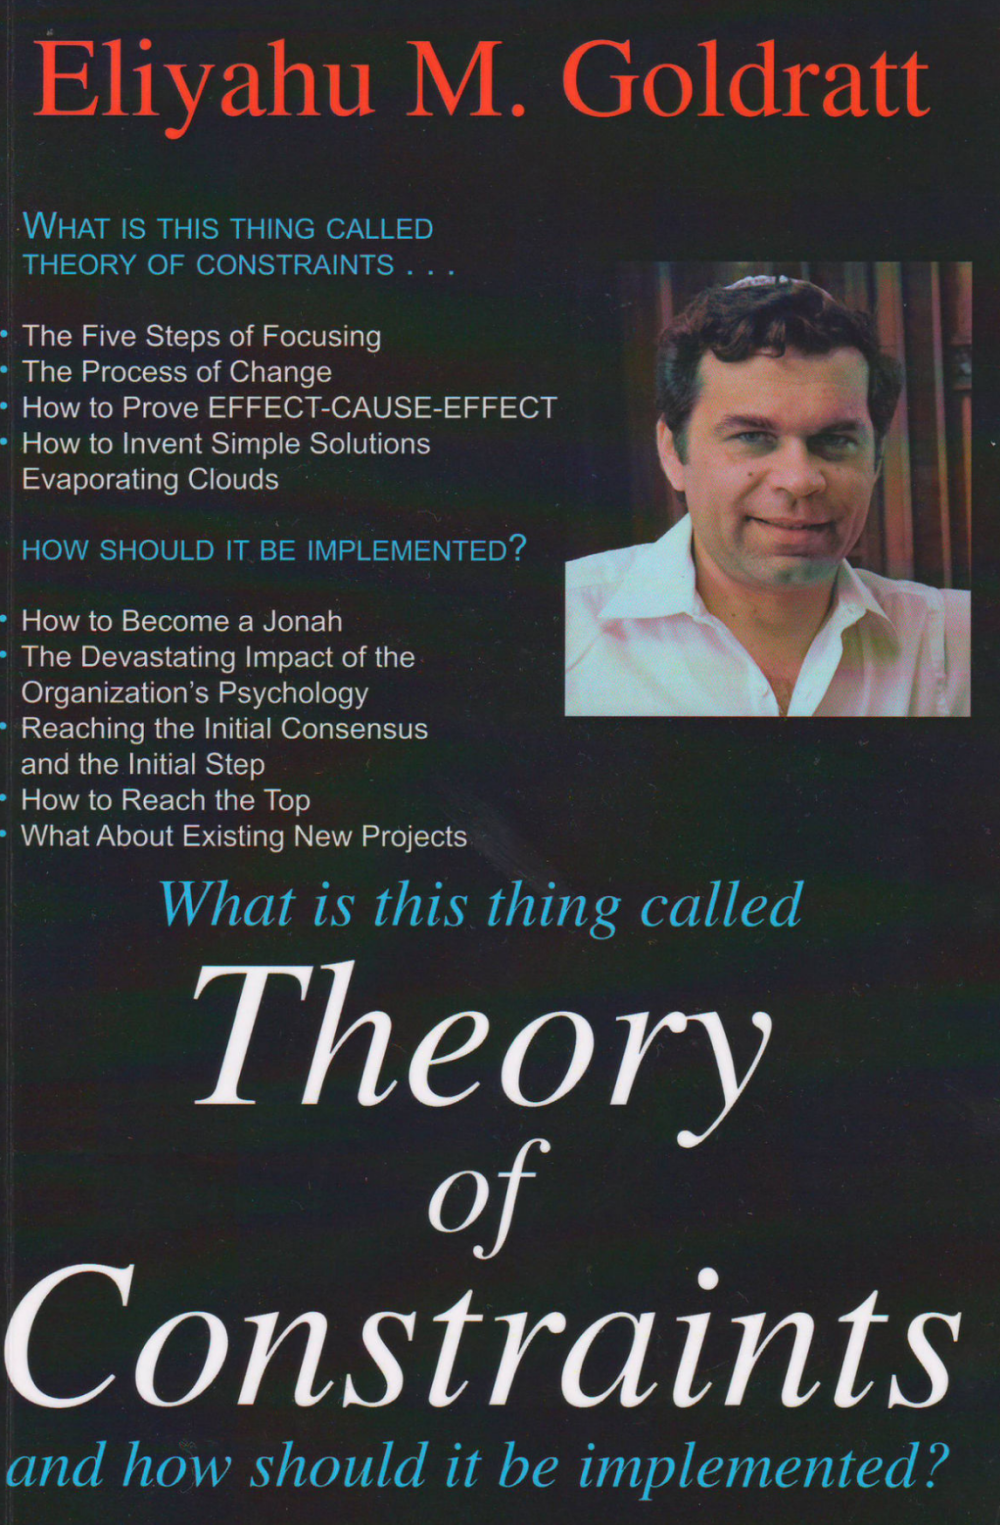 Theory of Constraints cover features a picture of Eli Goldratt and bullet lists summarizing the contents